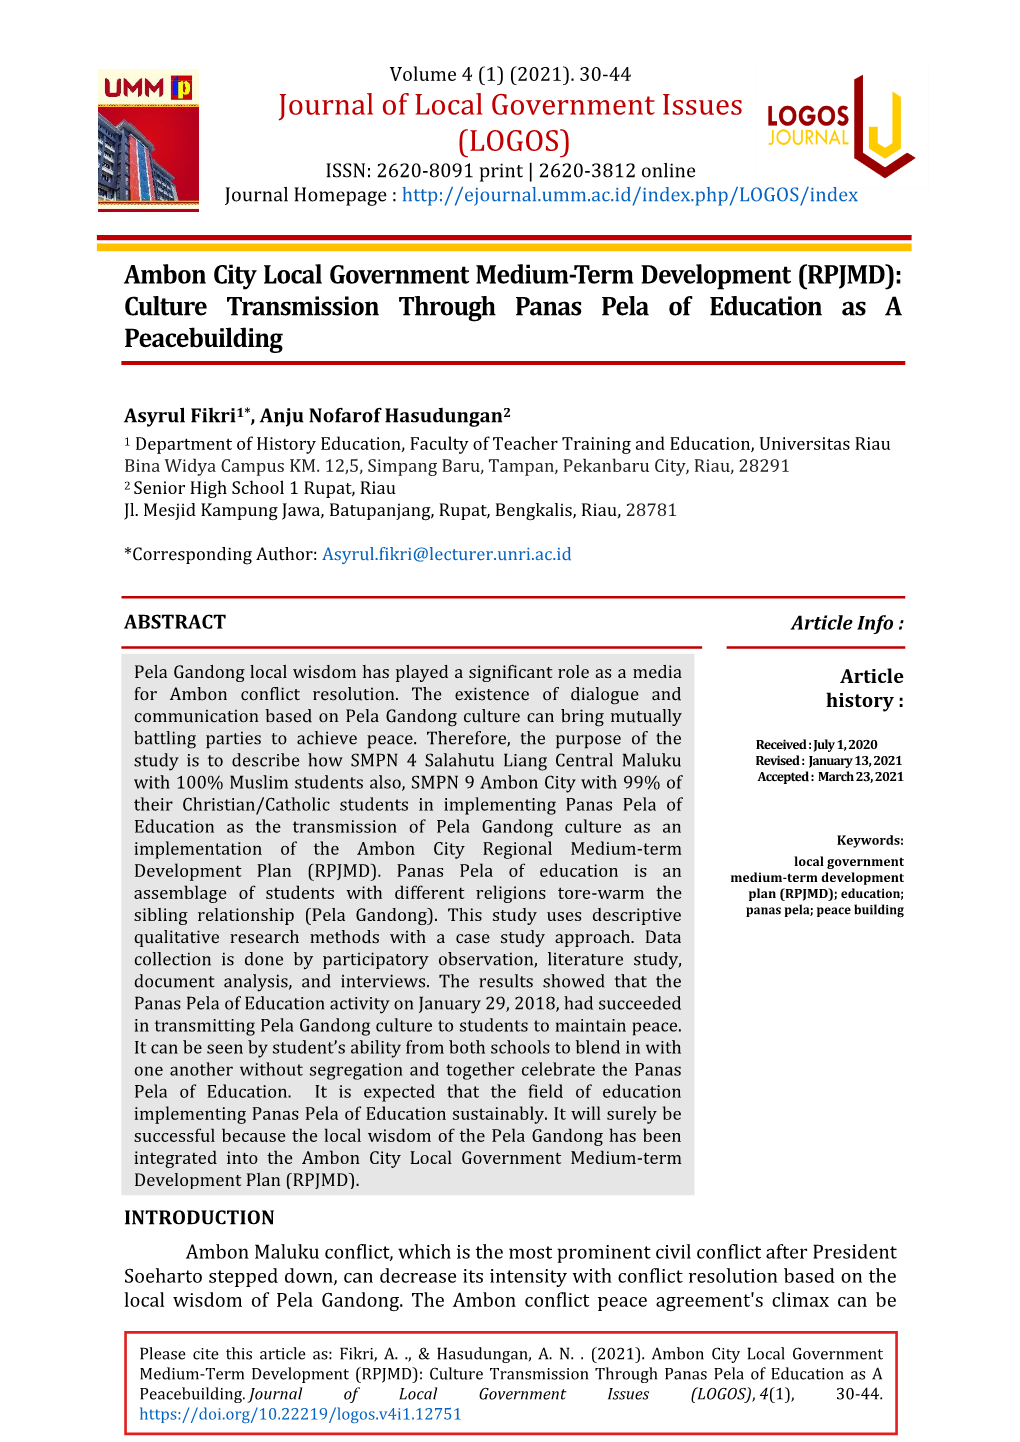 Journal of Local Government Issues (LOGOS) ISSN: 2620-8091 Print | 2620-3812 Online Journal Homepage